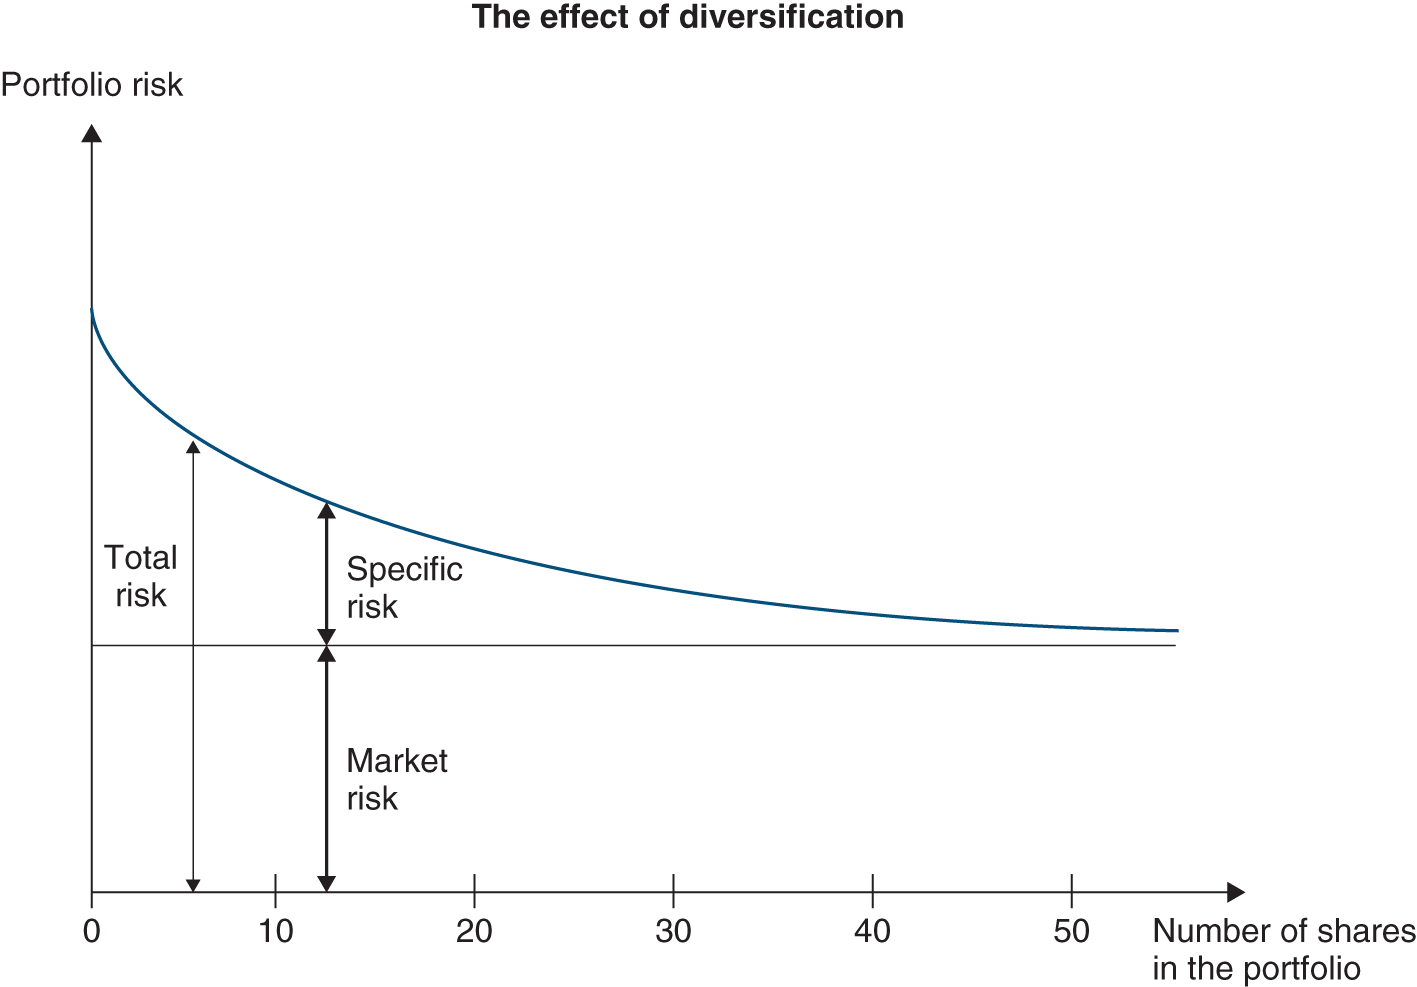 Graph depicts the effect of diversification